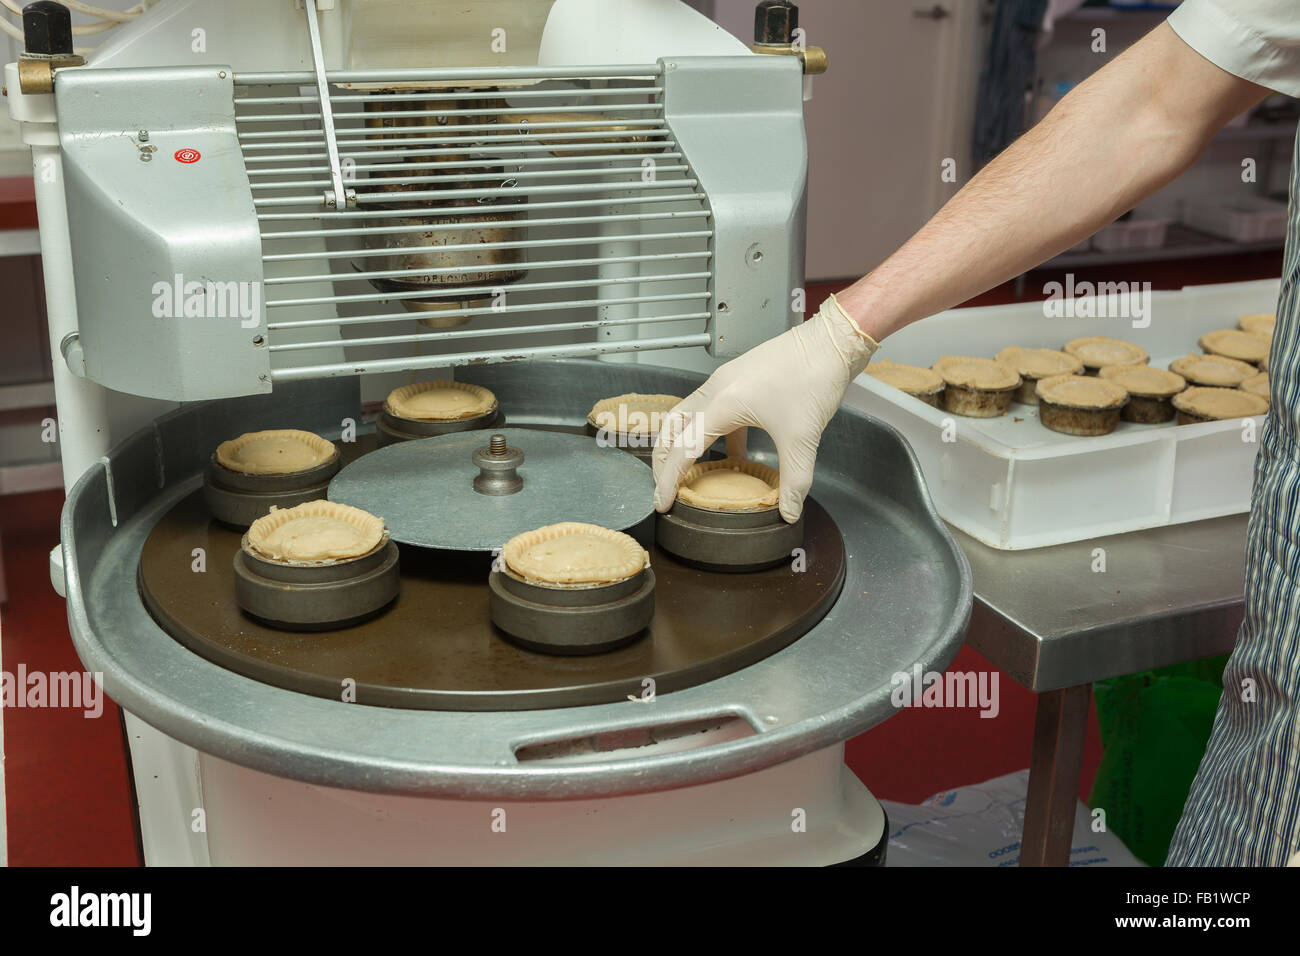 https://c8.alamy.com/comp/FB1WCP/a-man-making-pork-pies-in-a-factory-with-an-automated-machine-FB1WCP.jpg